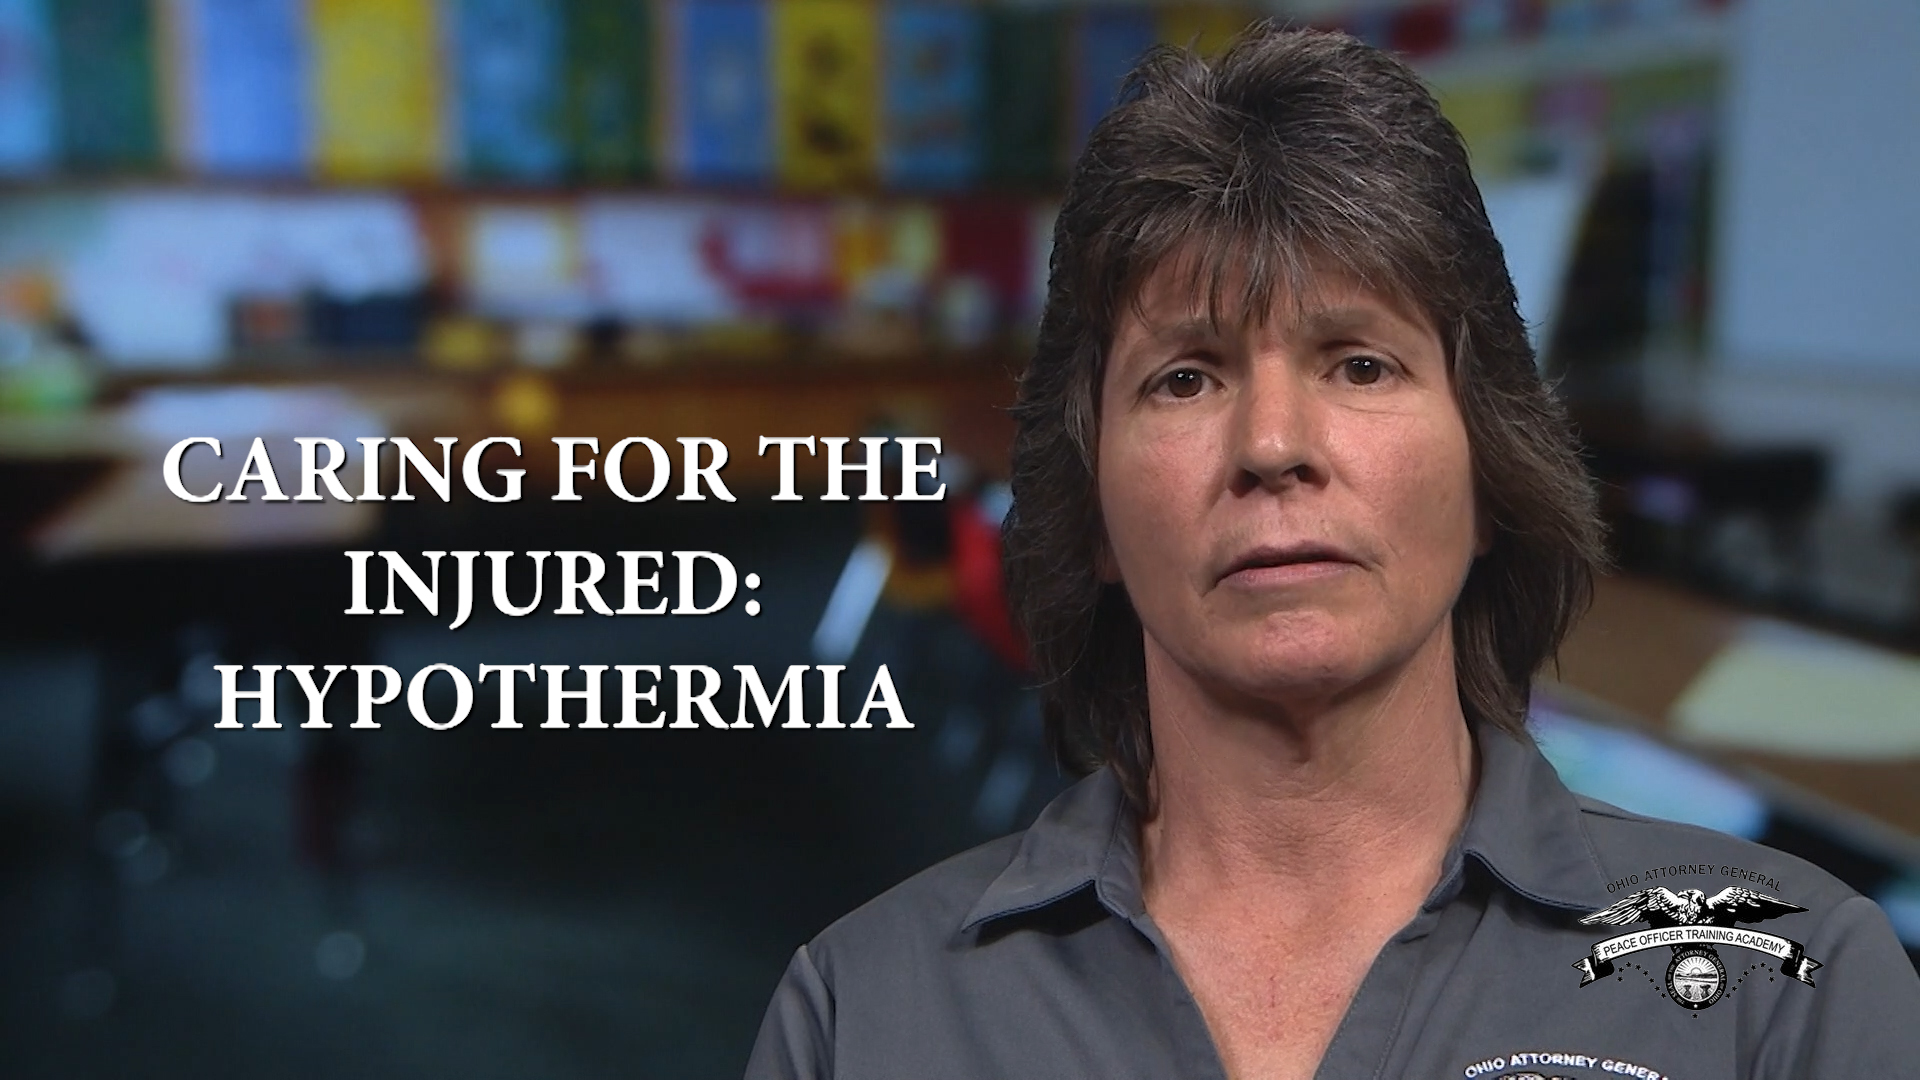 Video 20: Caring for the Injured – Hypothermia